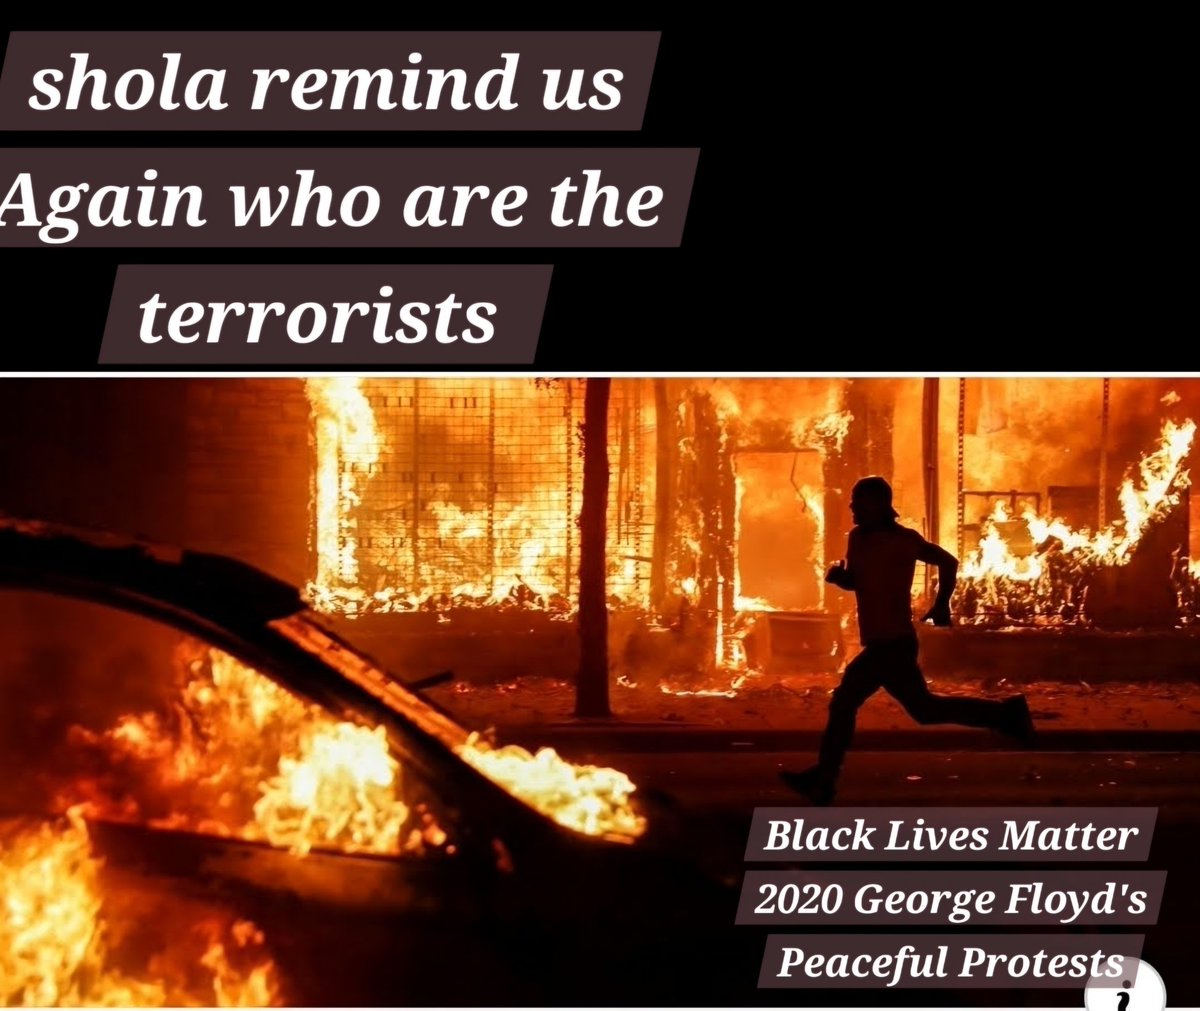 @SholaMos1 Remind us again who is the face of 2020 British Black Lives Matter George Floyd's peaceful protests